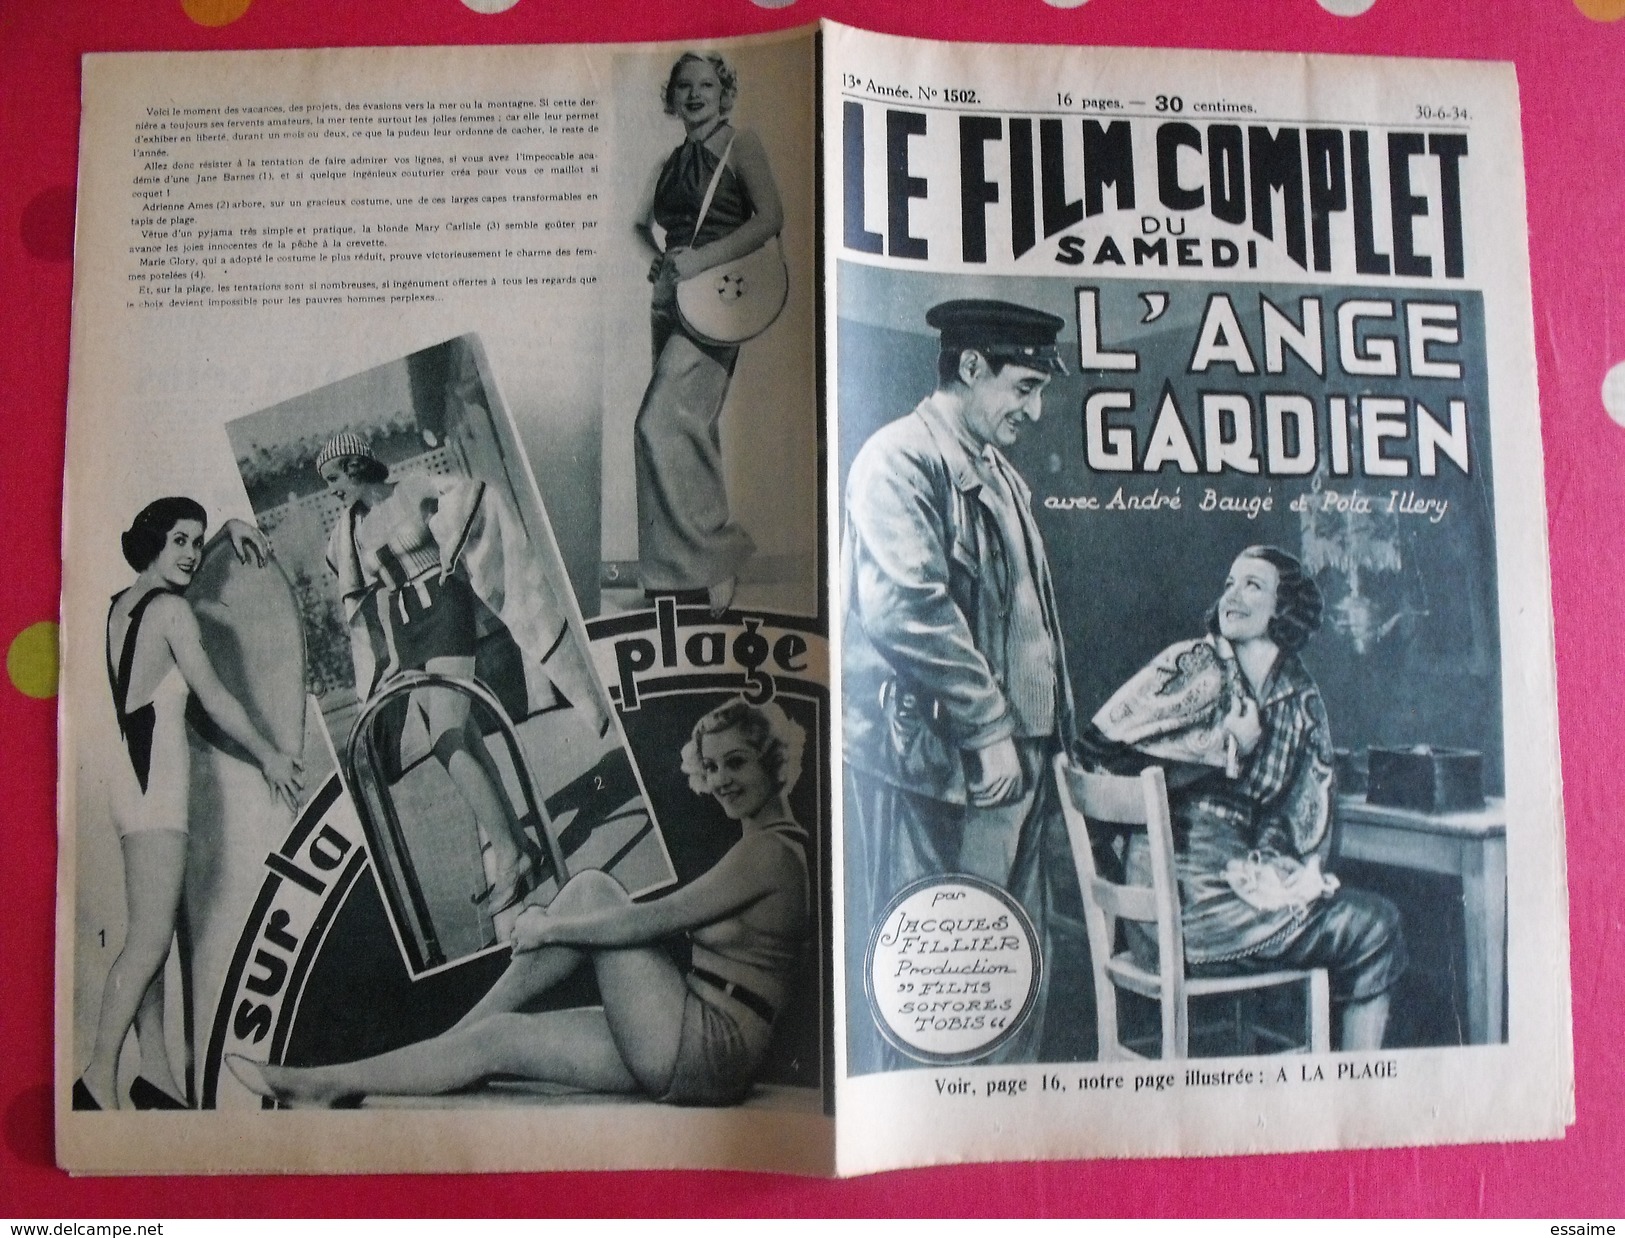 8 revues "le film complet" 1934. marie bell georges carpentier arlette marchal spinelly raimu hepburn gloria swanson